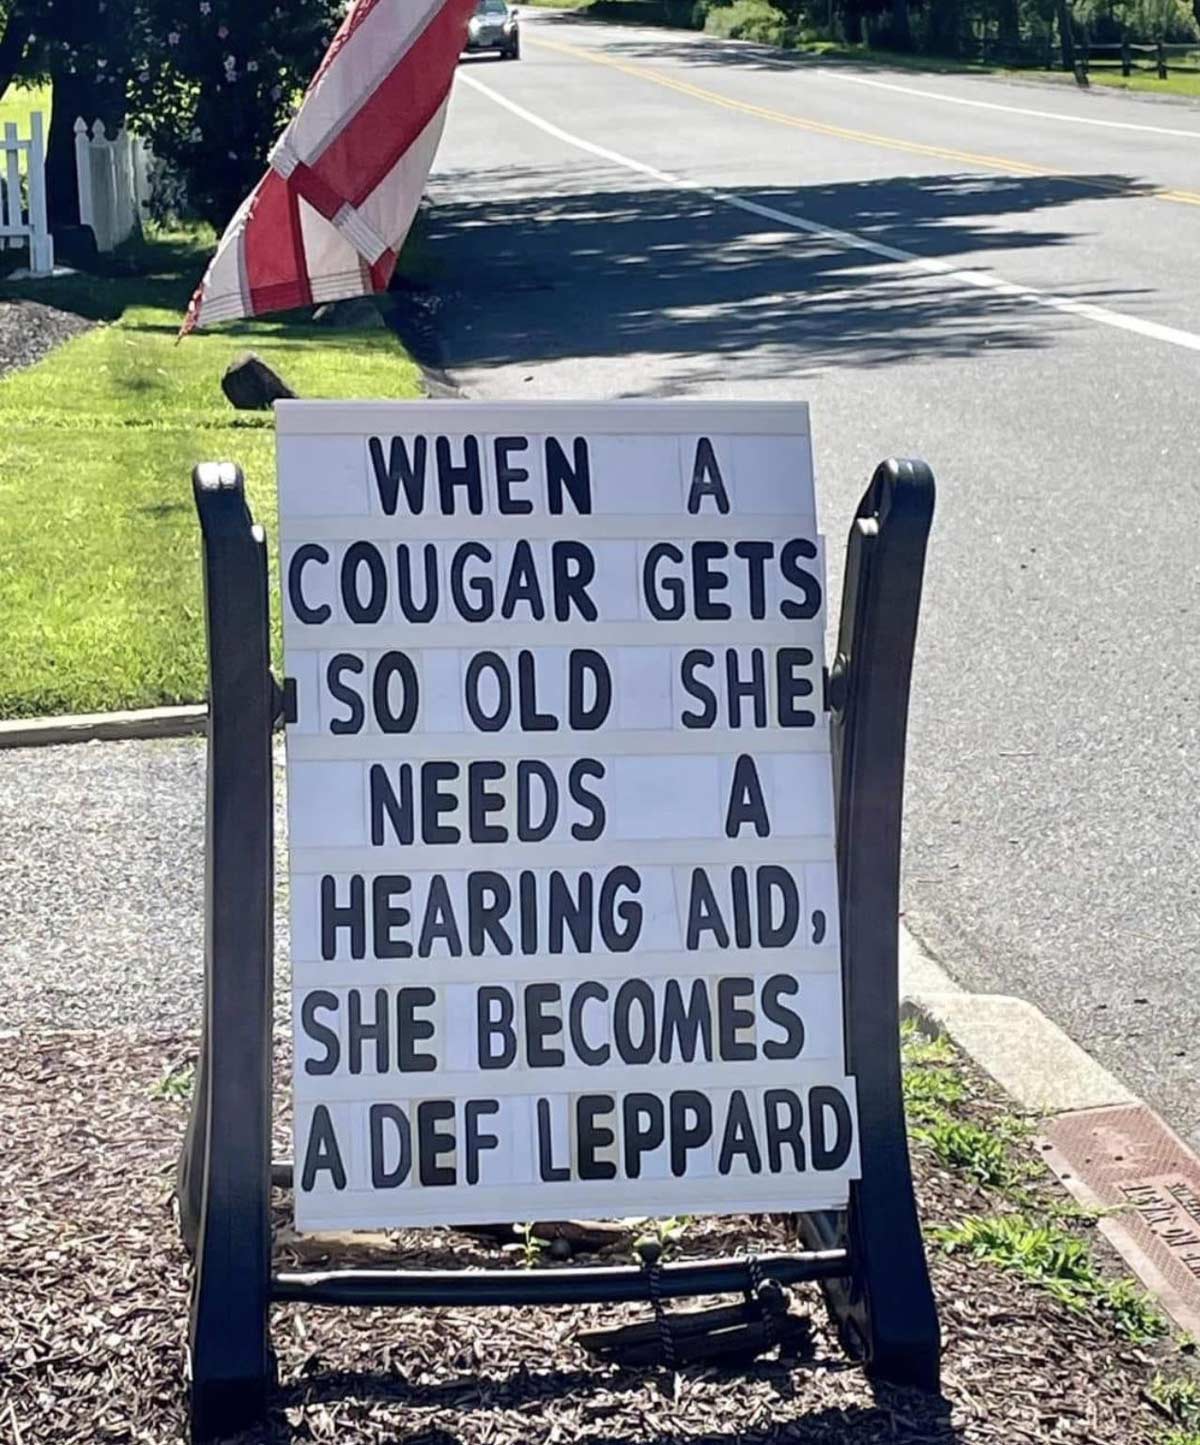 When a cougar gets so old